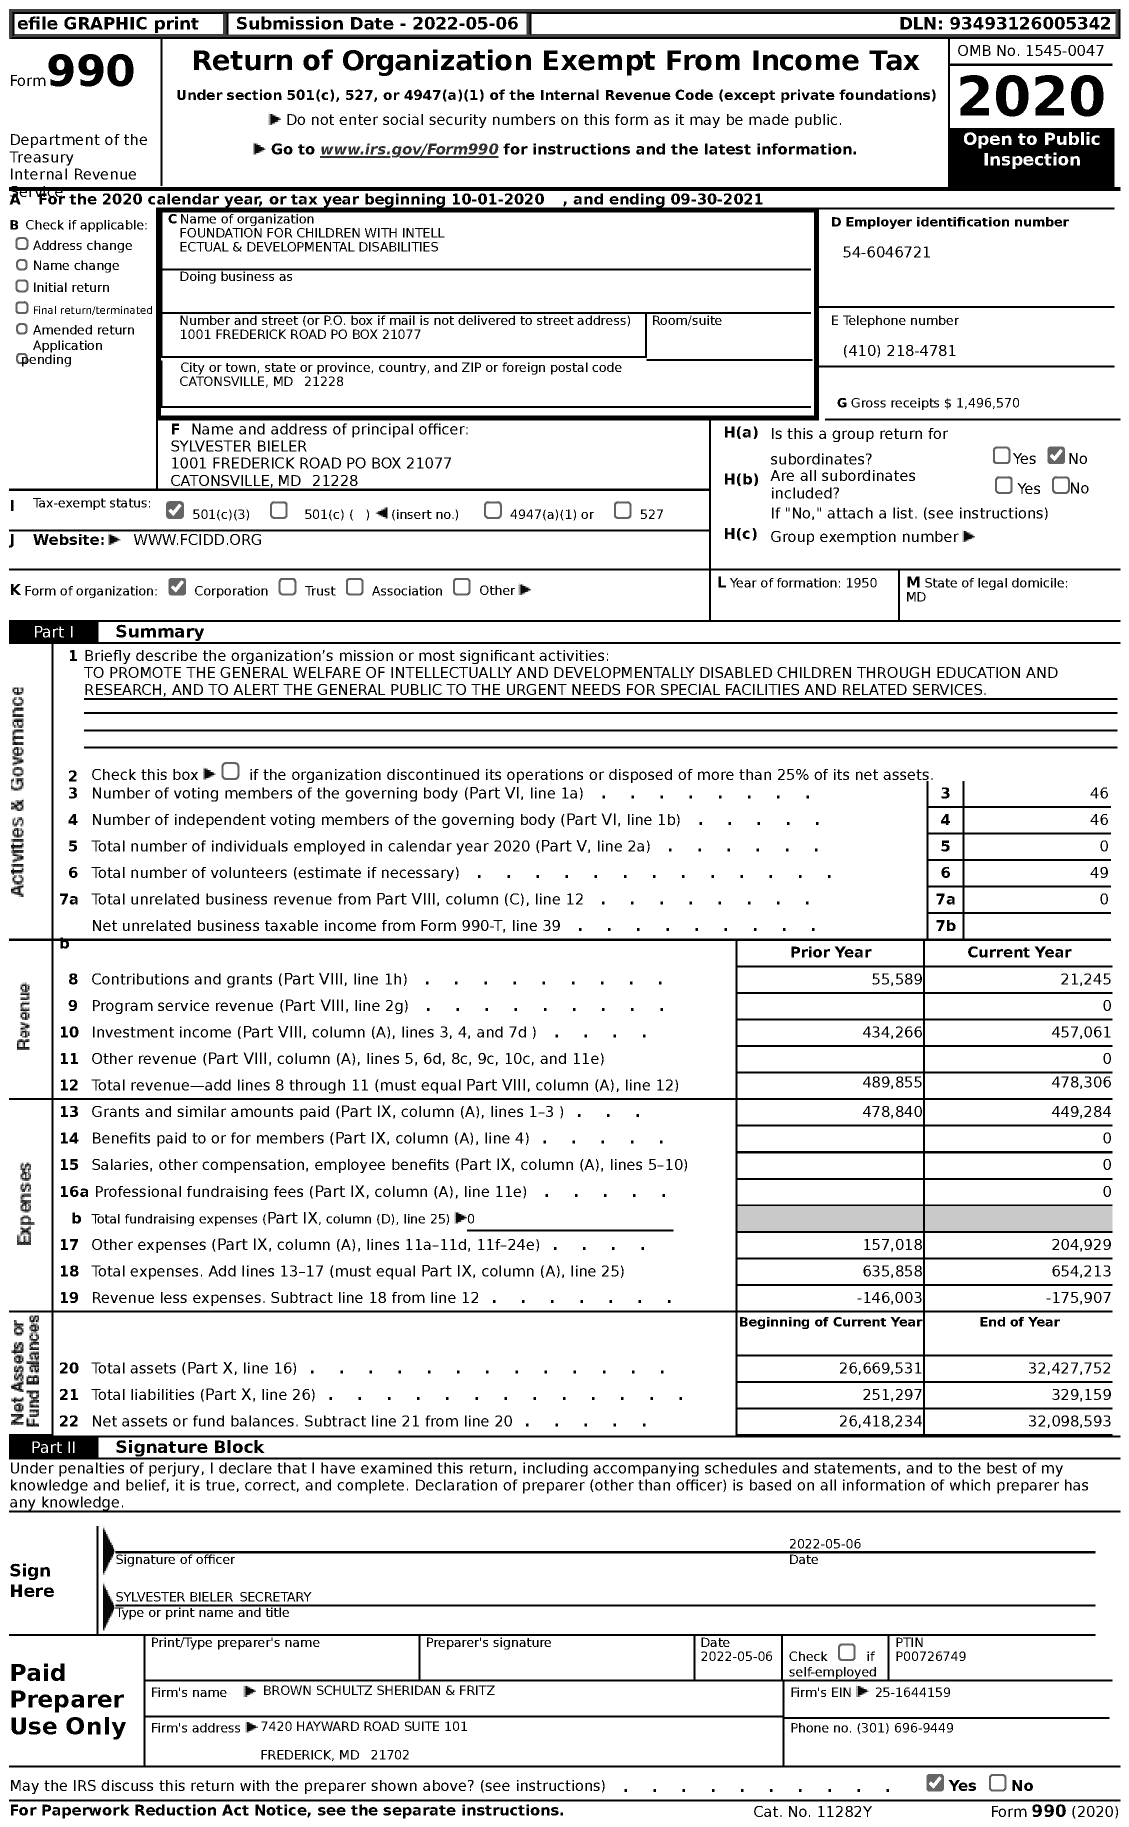 Image of first page of 2020 Form 990 for Foundation for Children with Intell Ectual and Developmental Disabilities